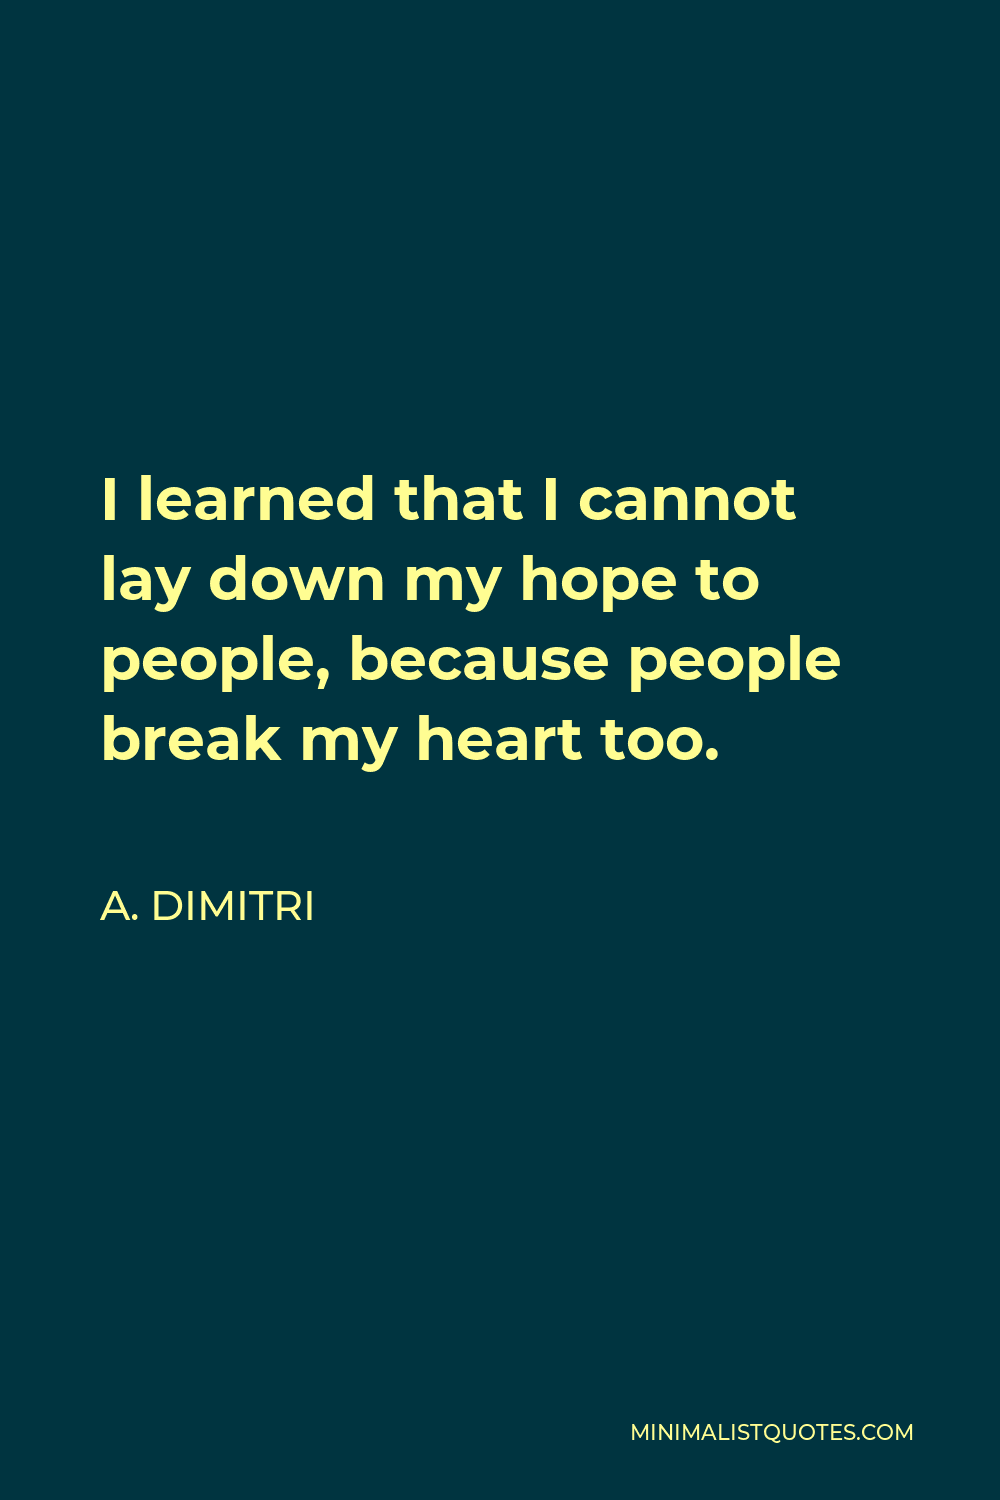 A. Dimitri Quote - I learned that I cannot lay down my hope to people, because people break my heart too.